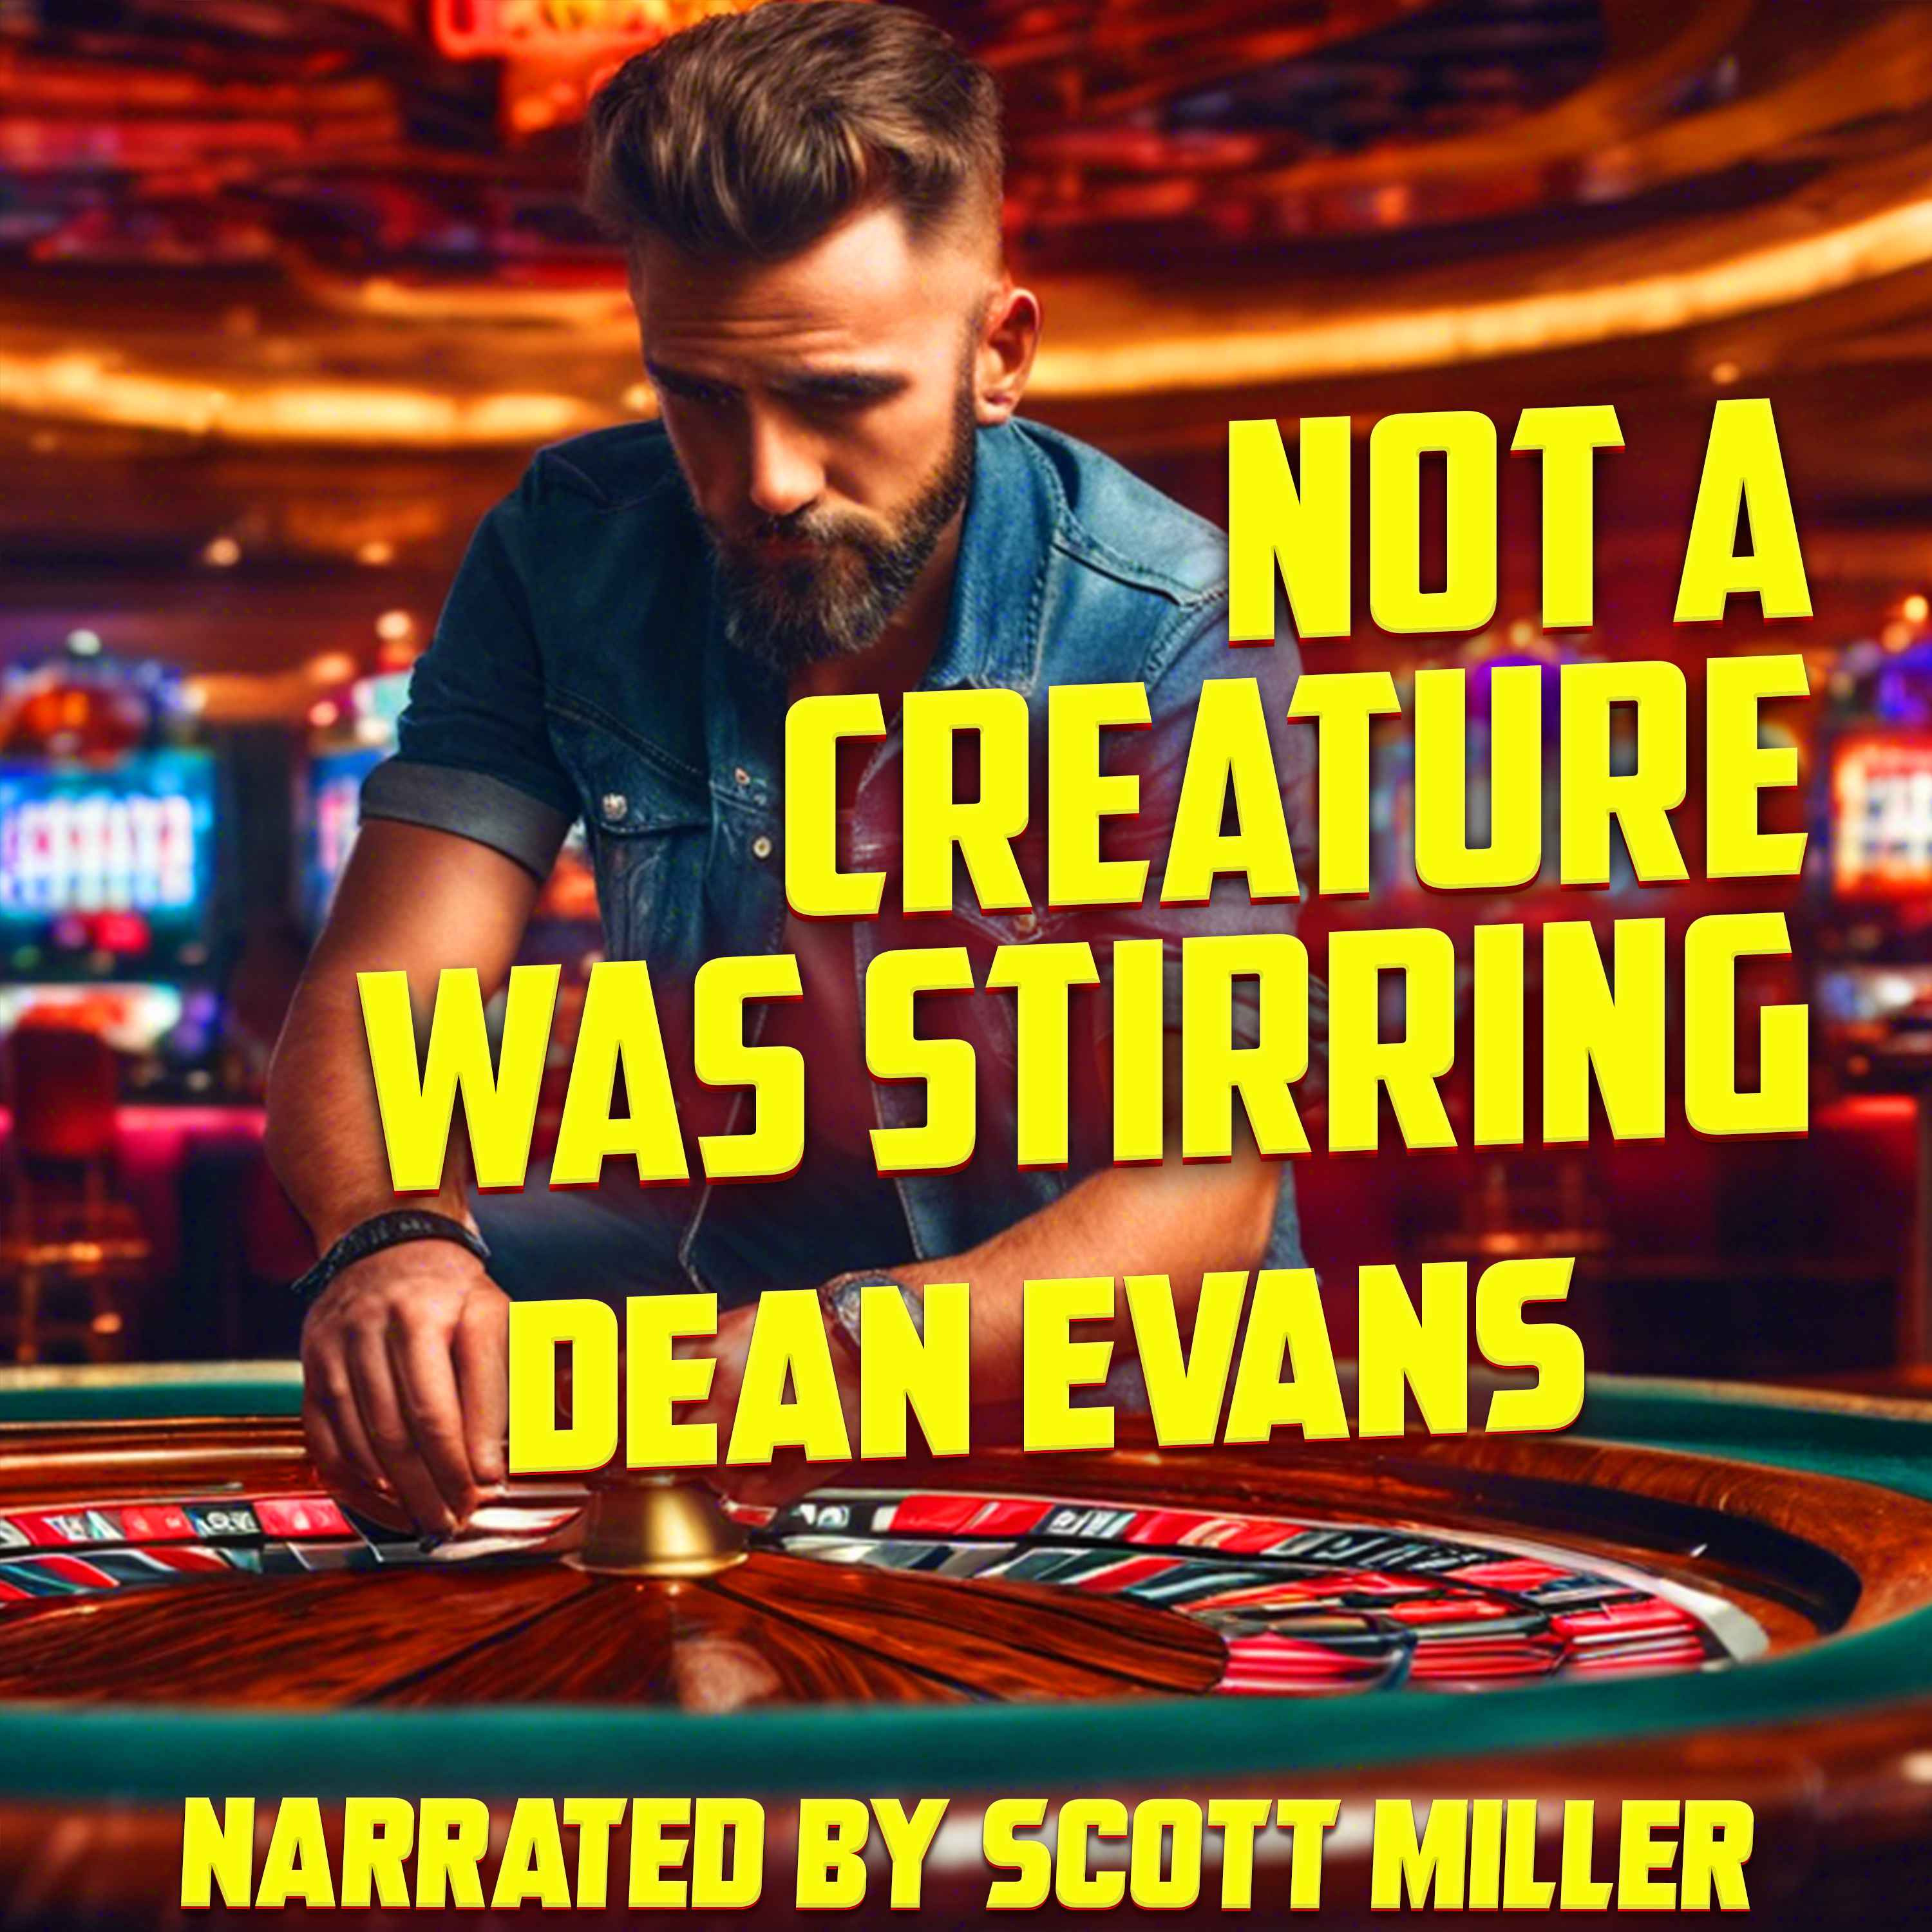 Not a Creature Was Stirring by Dean Evans - Apocalyptic Sci-Fi Short Story from the 1950s